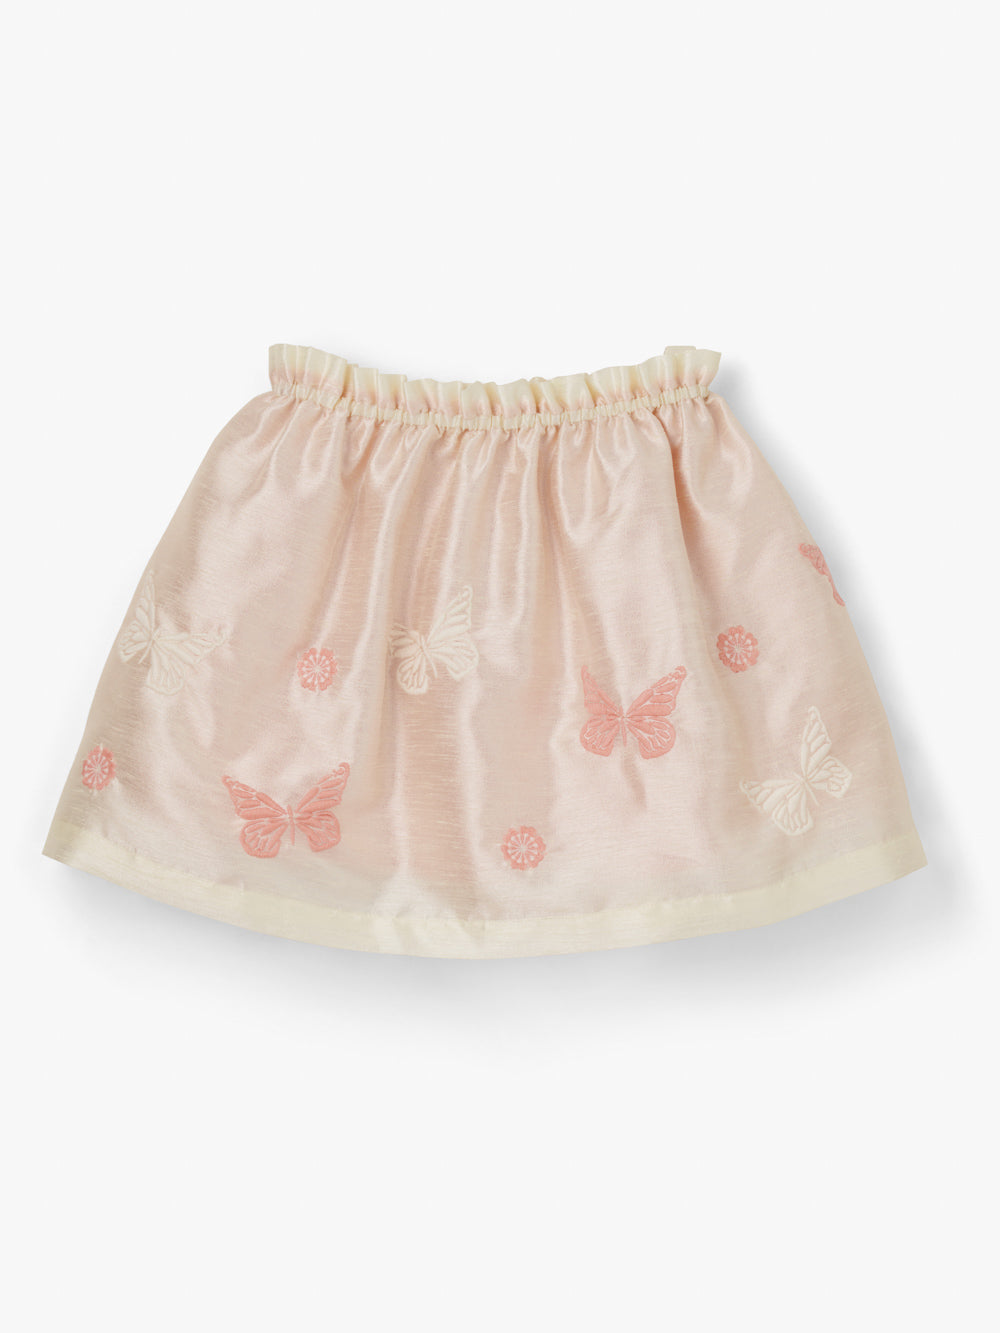 Stych Girls' Light Pink Taffeta Embroidered Butterfly Skirt | Size:  Age 3-5 years, Age 6-8 years 